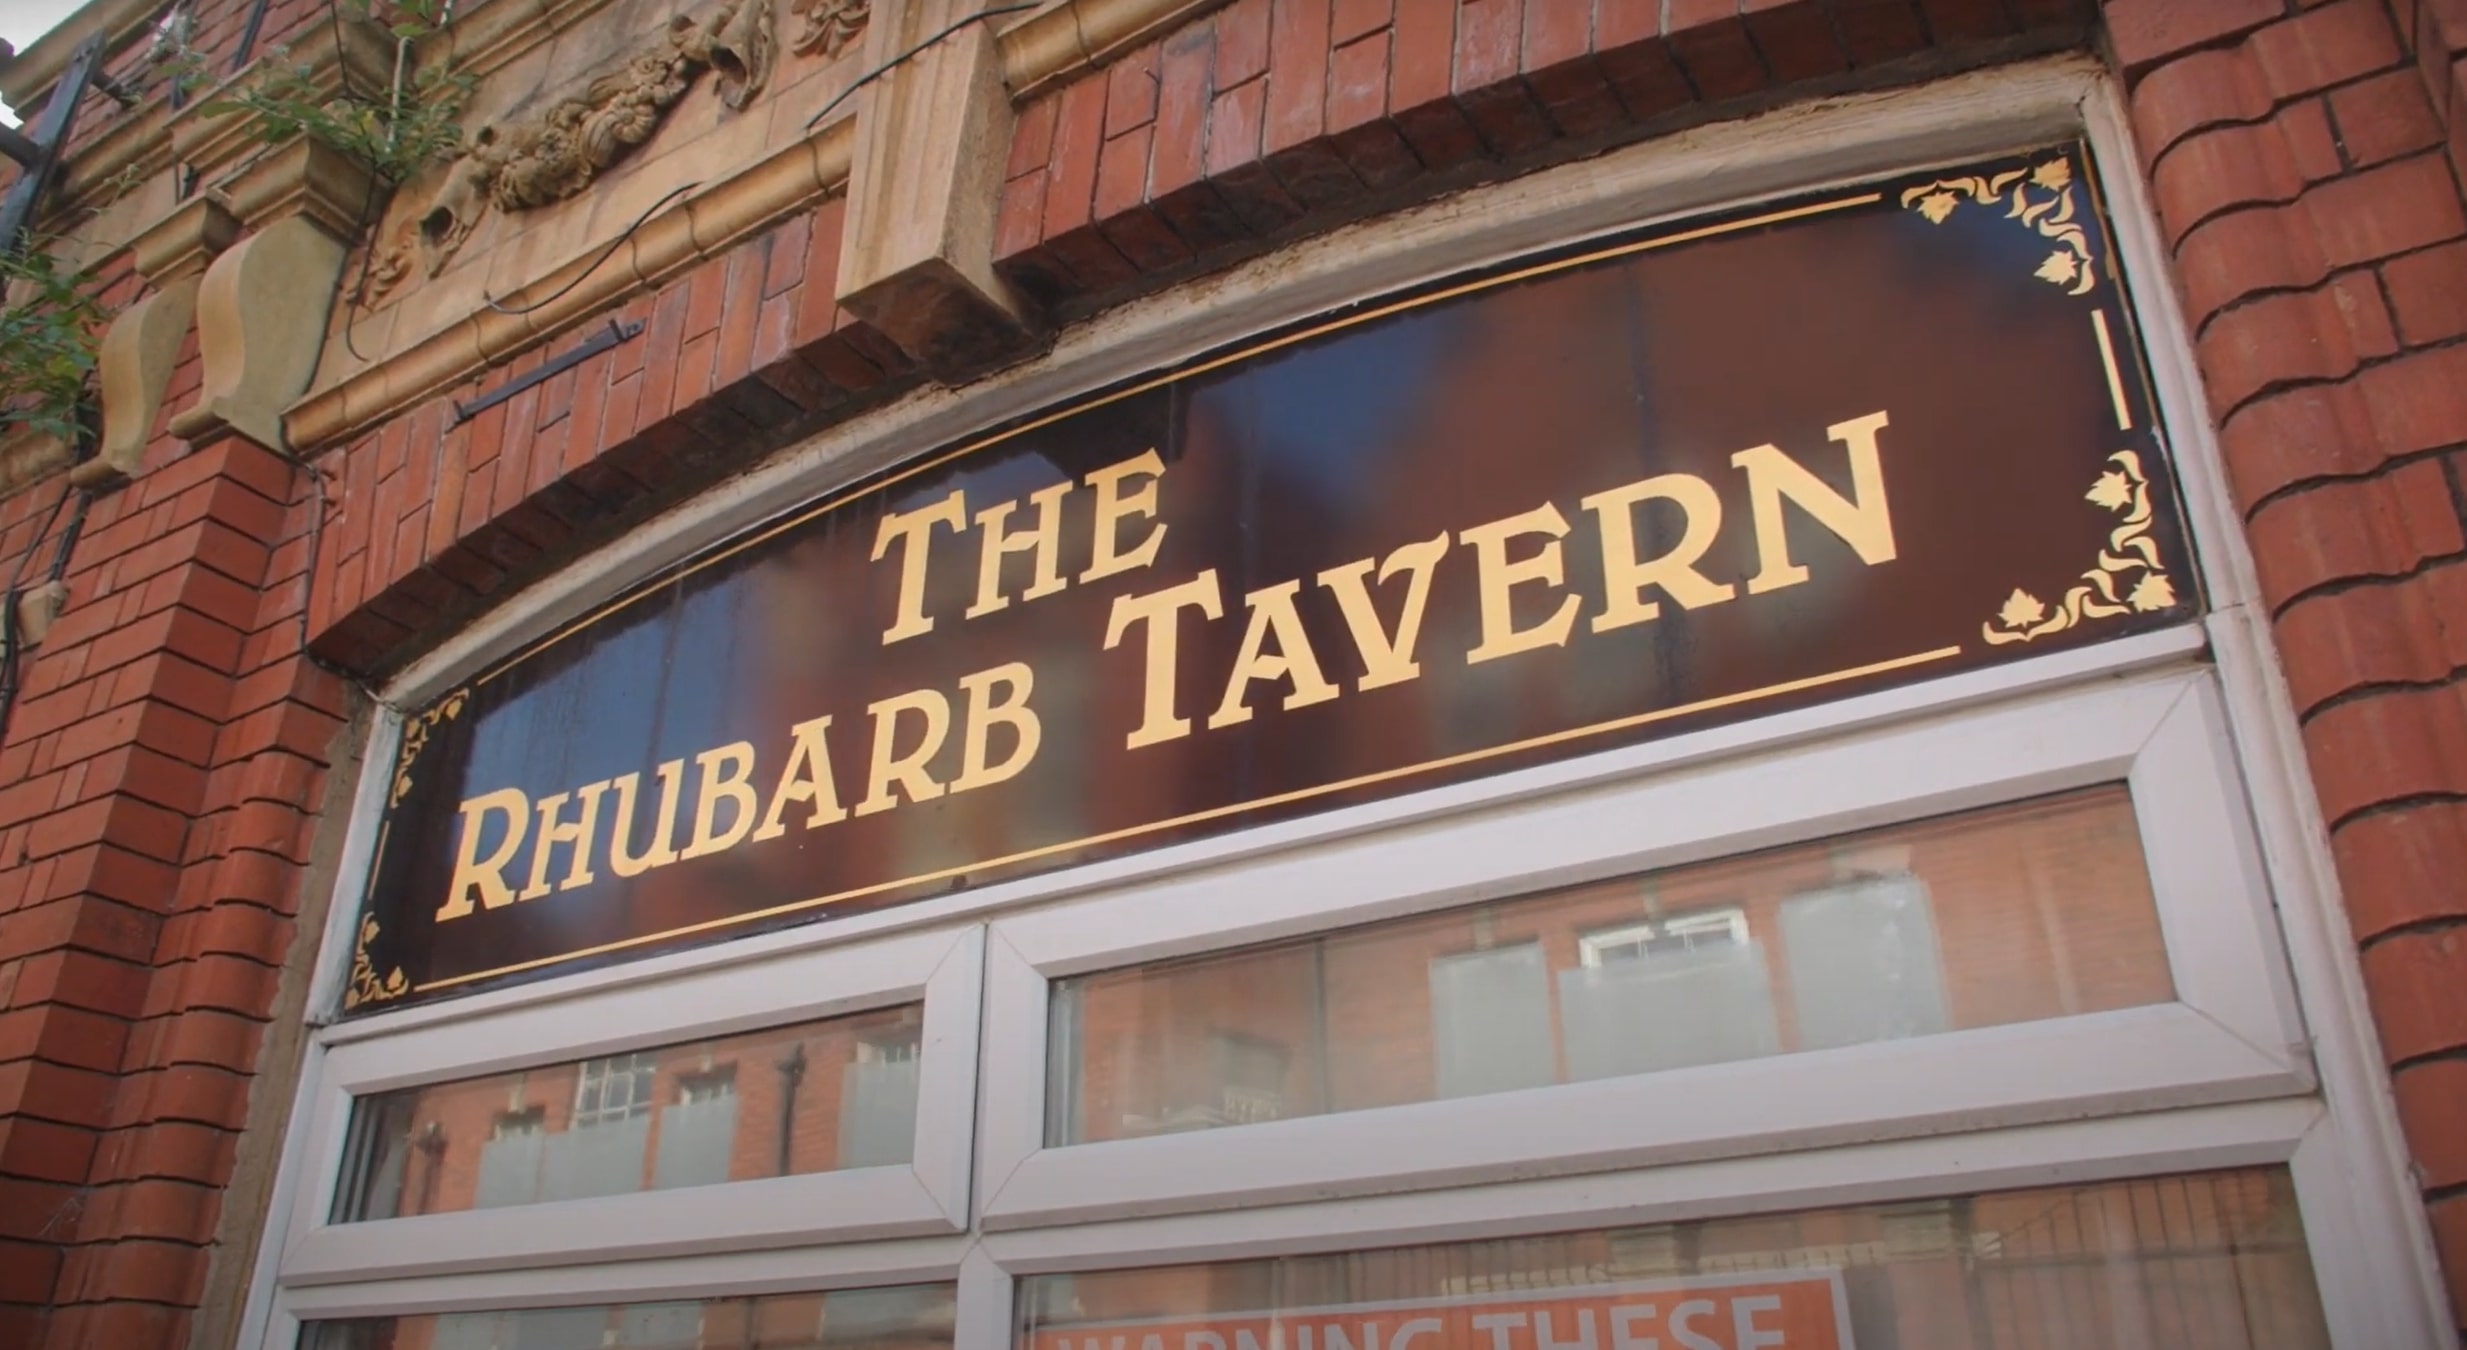 The Rhubarb sign above a window